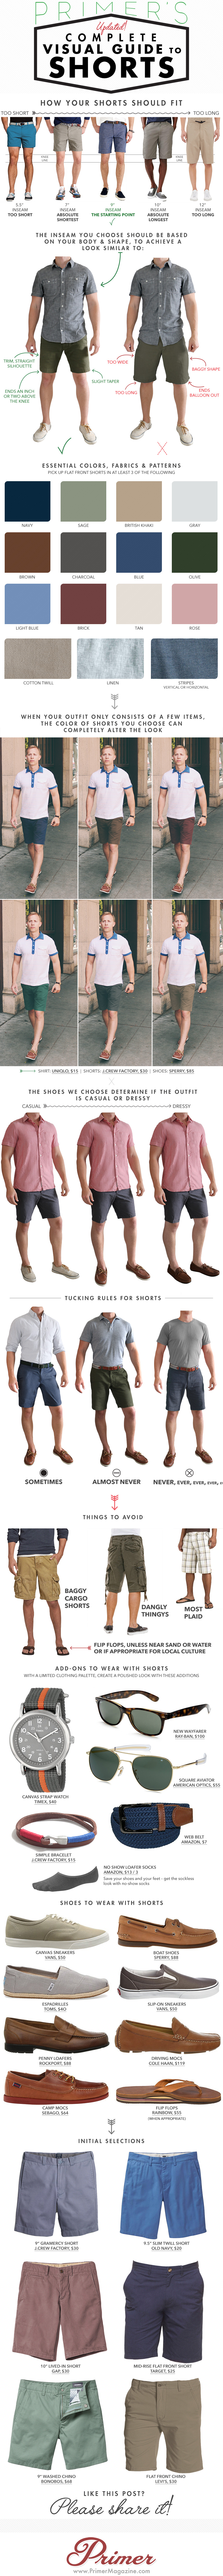 How men\'s shorts should fit infographic